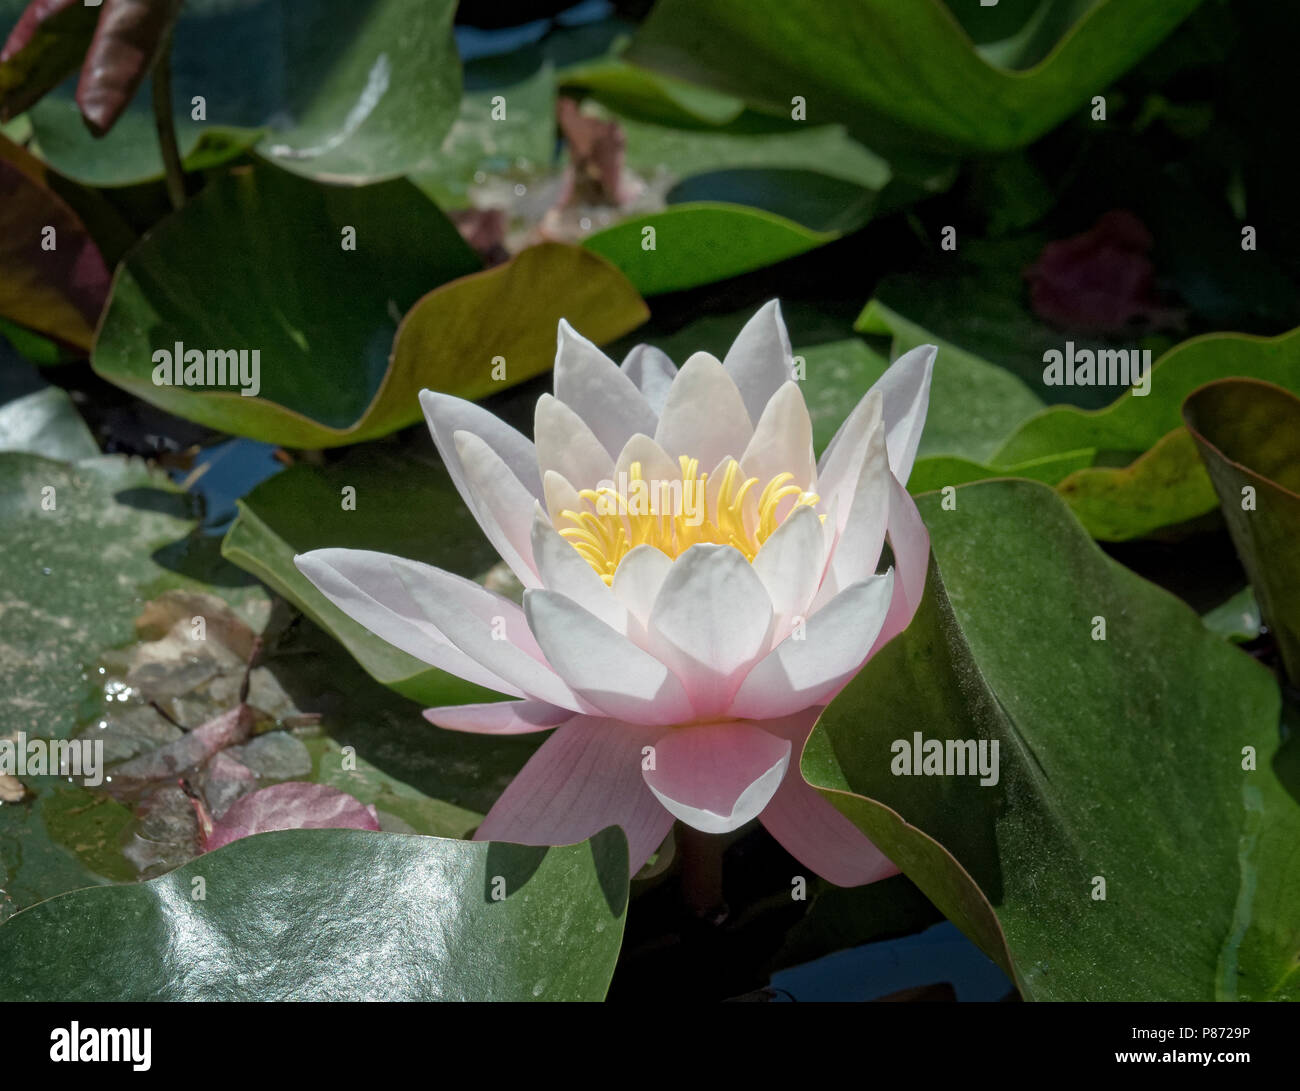 Flower of the European white water lily (Nymphaea alba) growing in the Bishop's Gardens, a public garden in Palma, Mallorca, Spain. Stock Photo